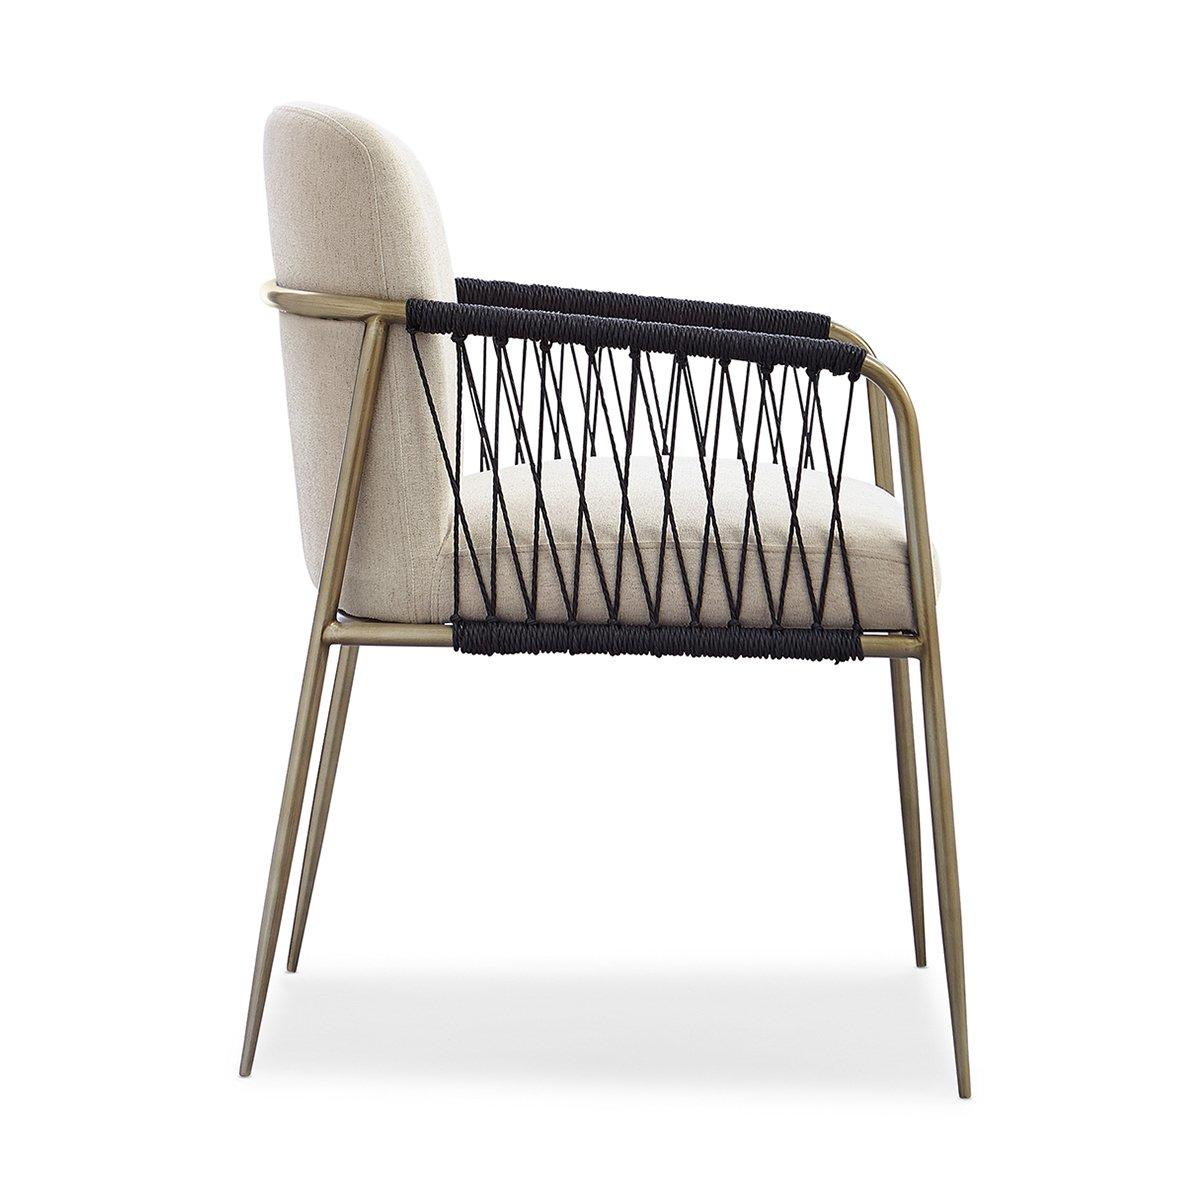 RDC-1092 Remix Woven Dining Chair